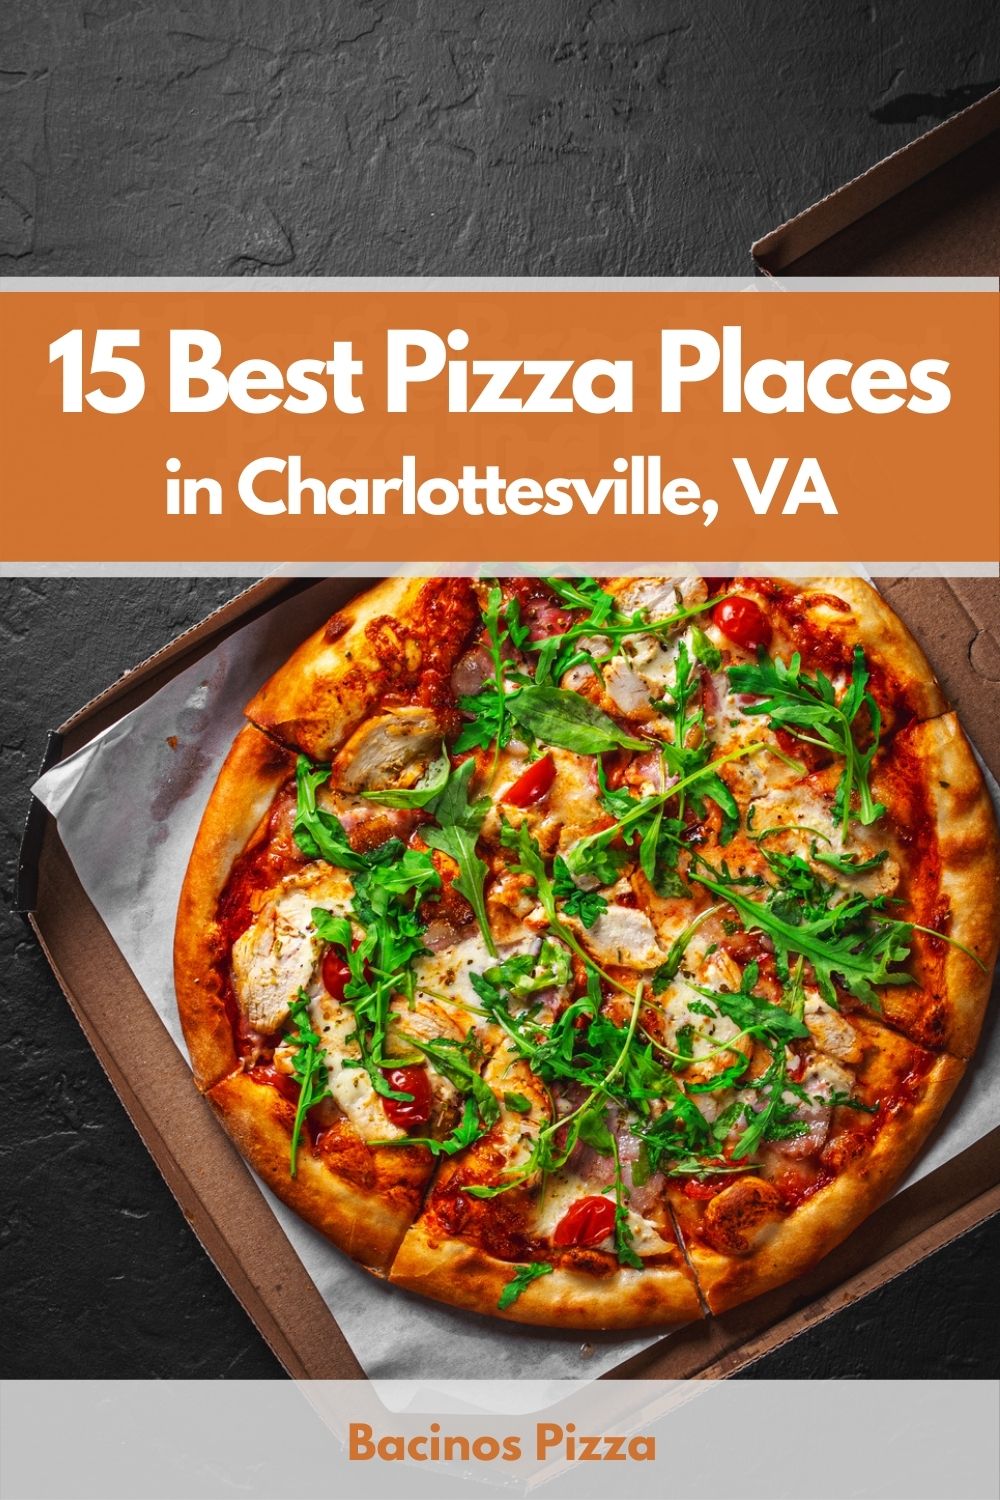 15 Best Pizza Places in Charlottesville, VA pin